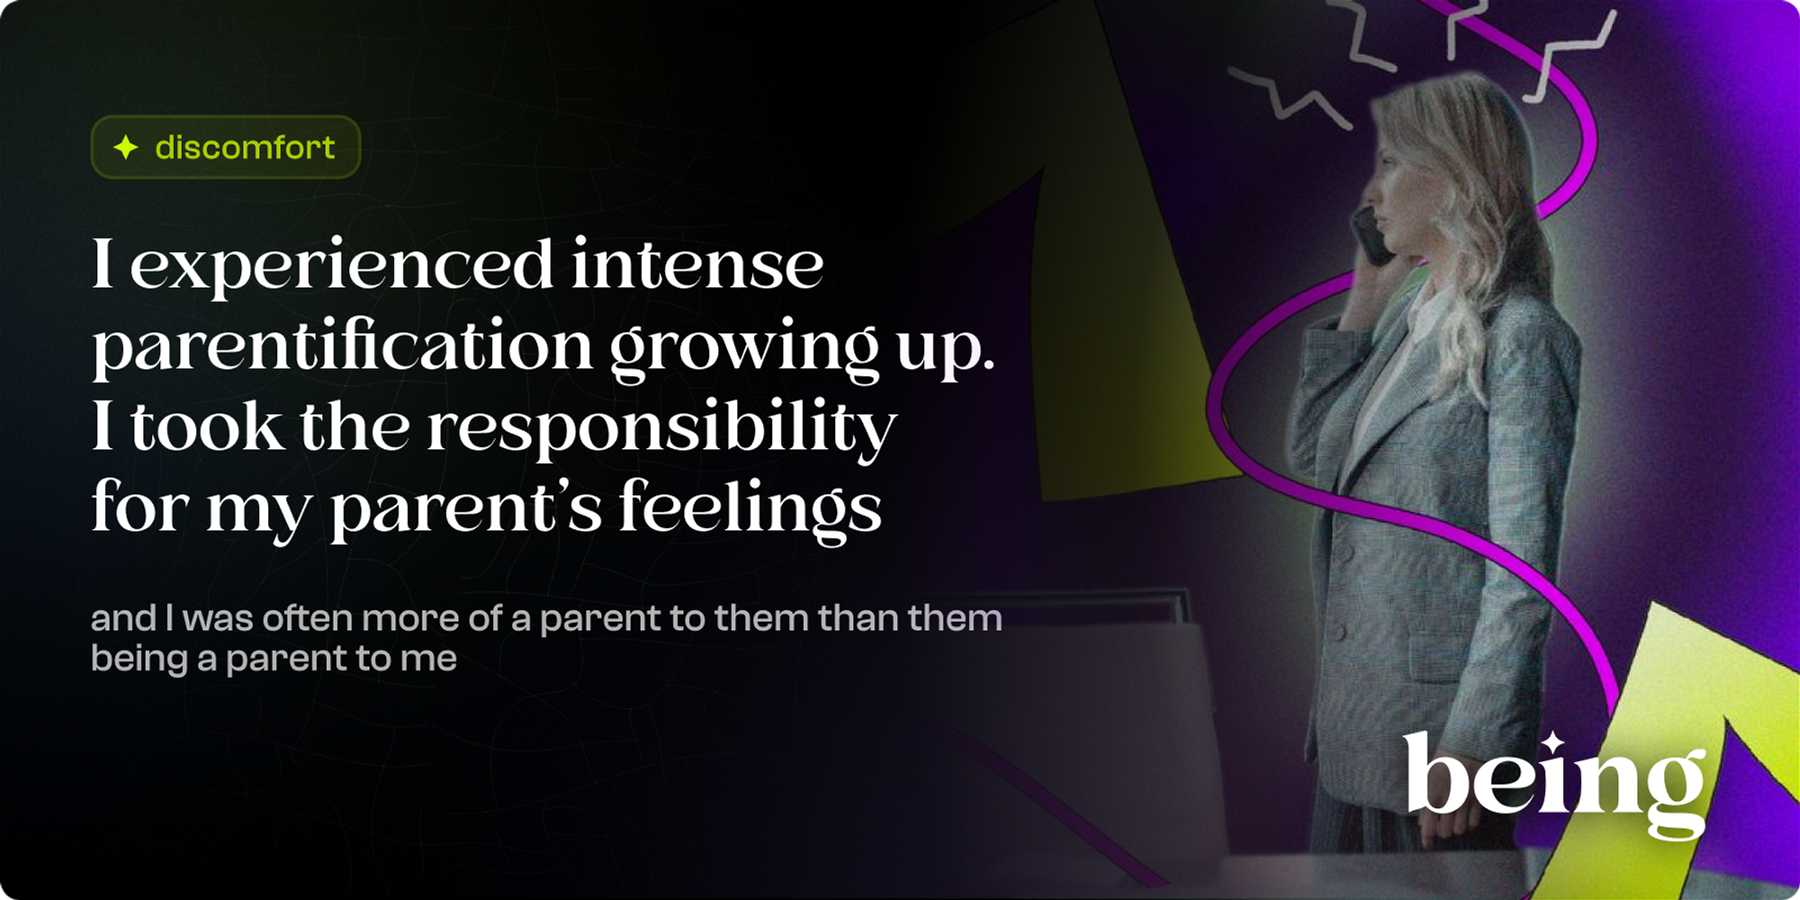 I experienced intense parentification growing up. I took the responsibility for my parent’s feelings and I was often more of a parent to them than them being a parent to me